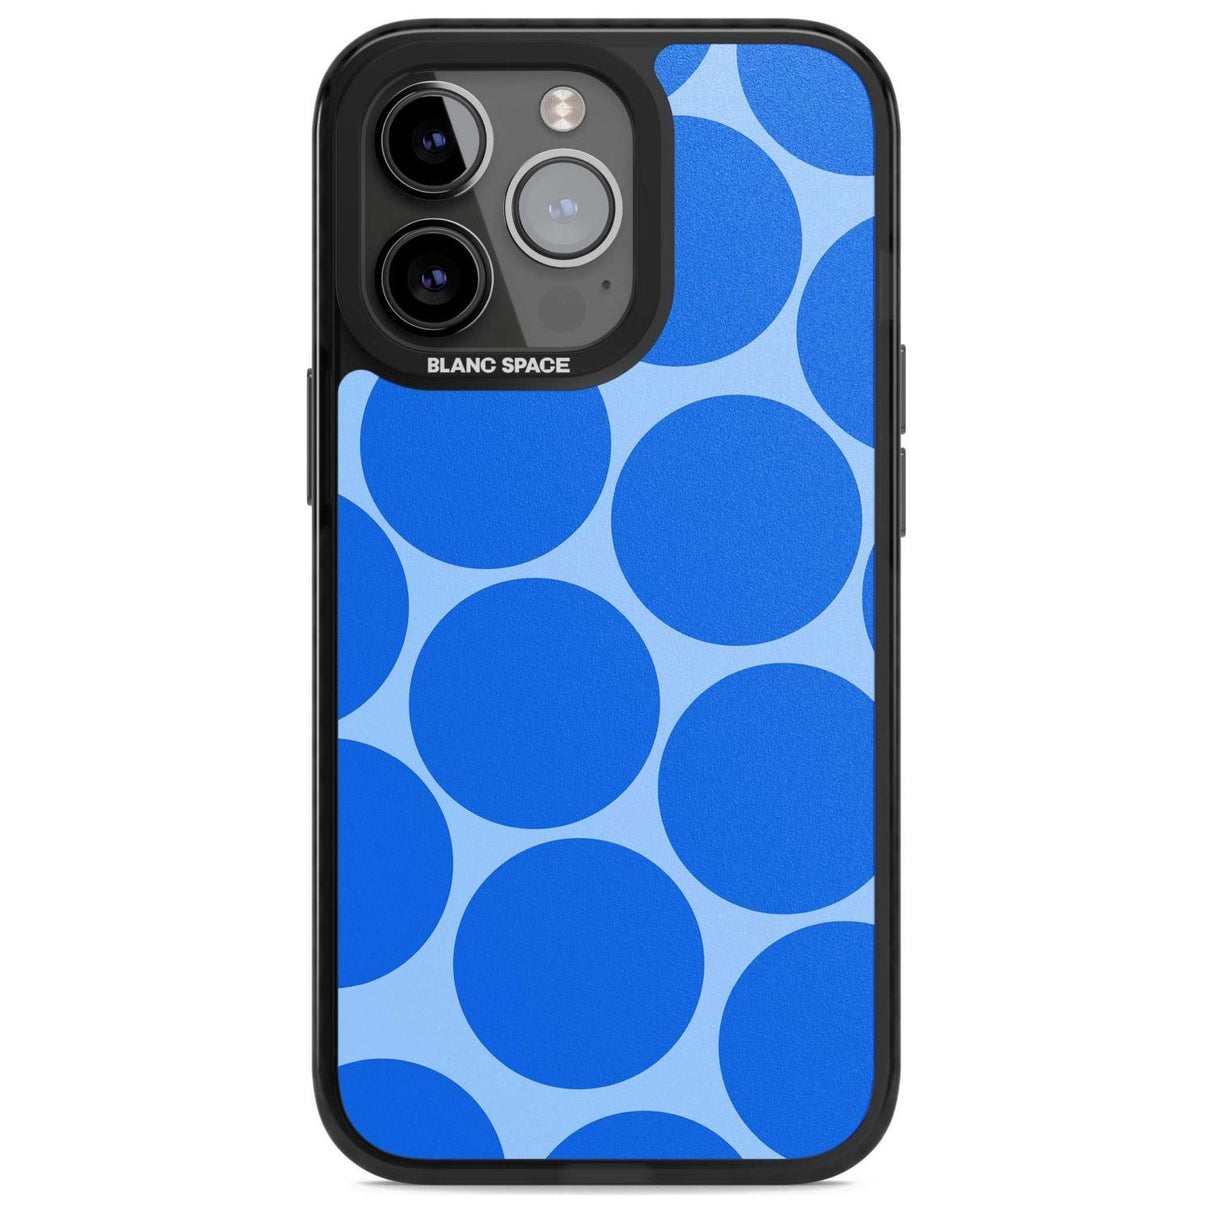 Abstract Retro Shapes: Blue Dots Phone Case iPhone 15 Pro Max / Magsafe Black Impact Case,iPhone 15 Pro / Magsafe Black Impact Case,iPhone 14 Pro Max / Magsafe Black Impact Case,iPhone 14 Pro / Magsafe Black Impact Case,iPhone 13 Pro / Magsafe Black Impact Case Blanc Space